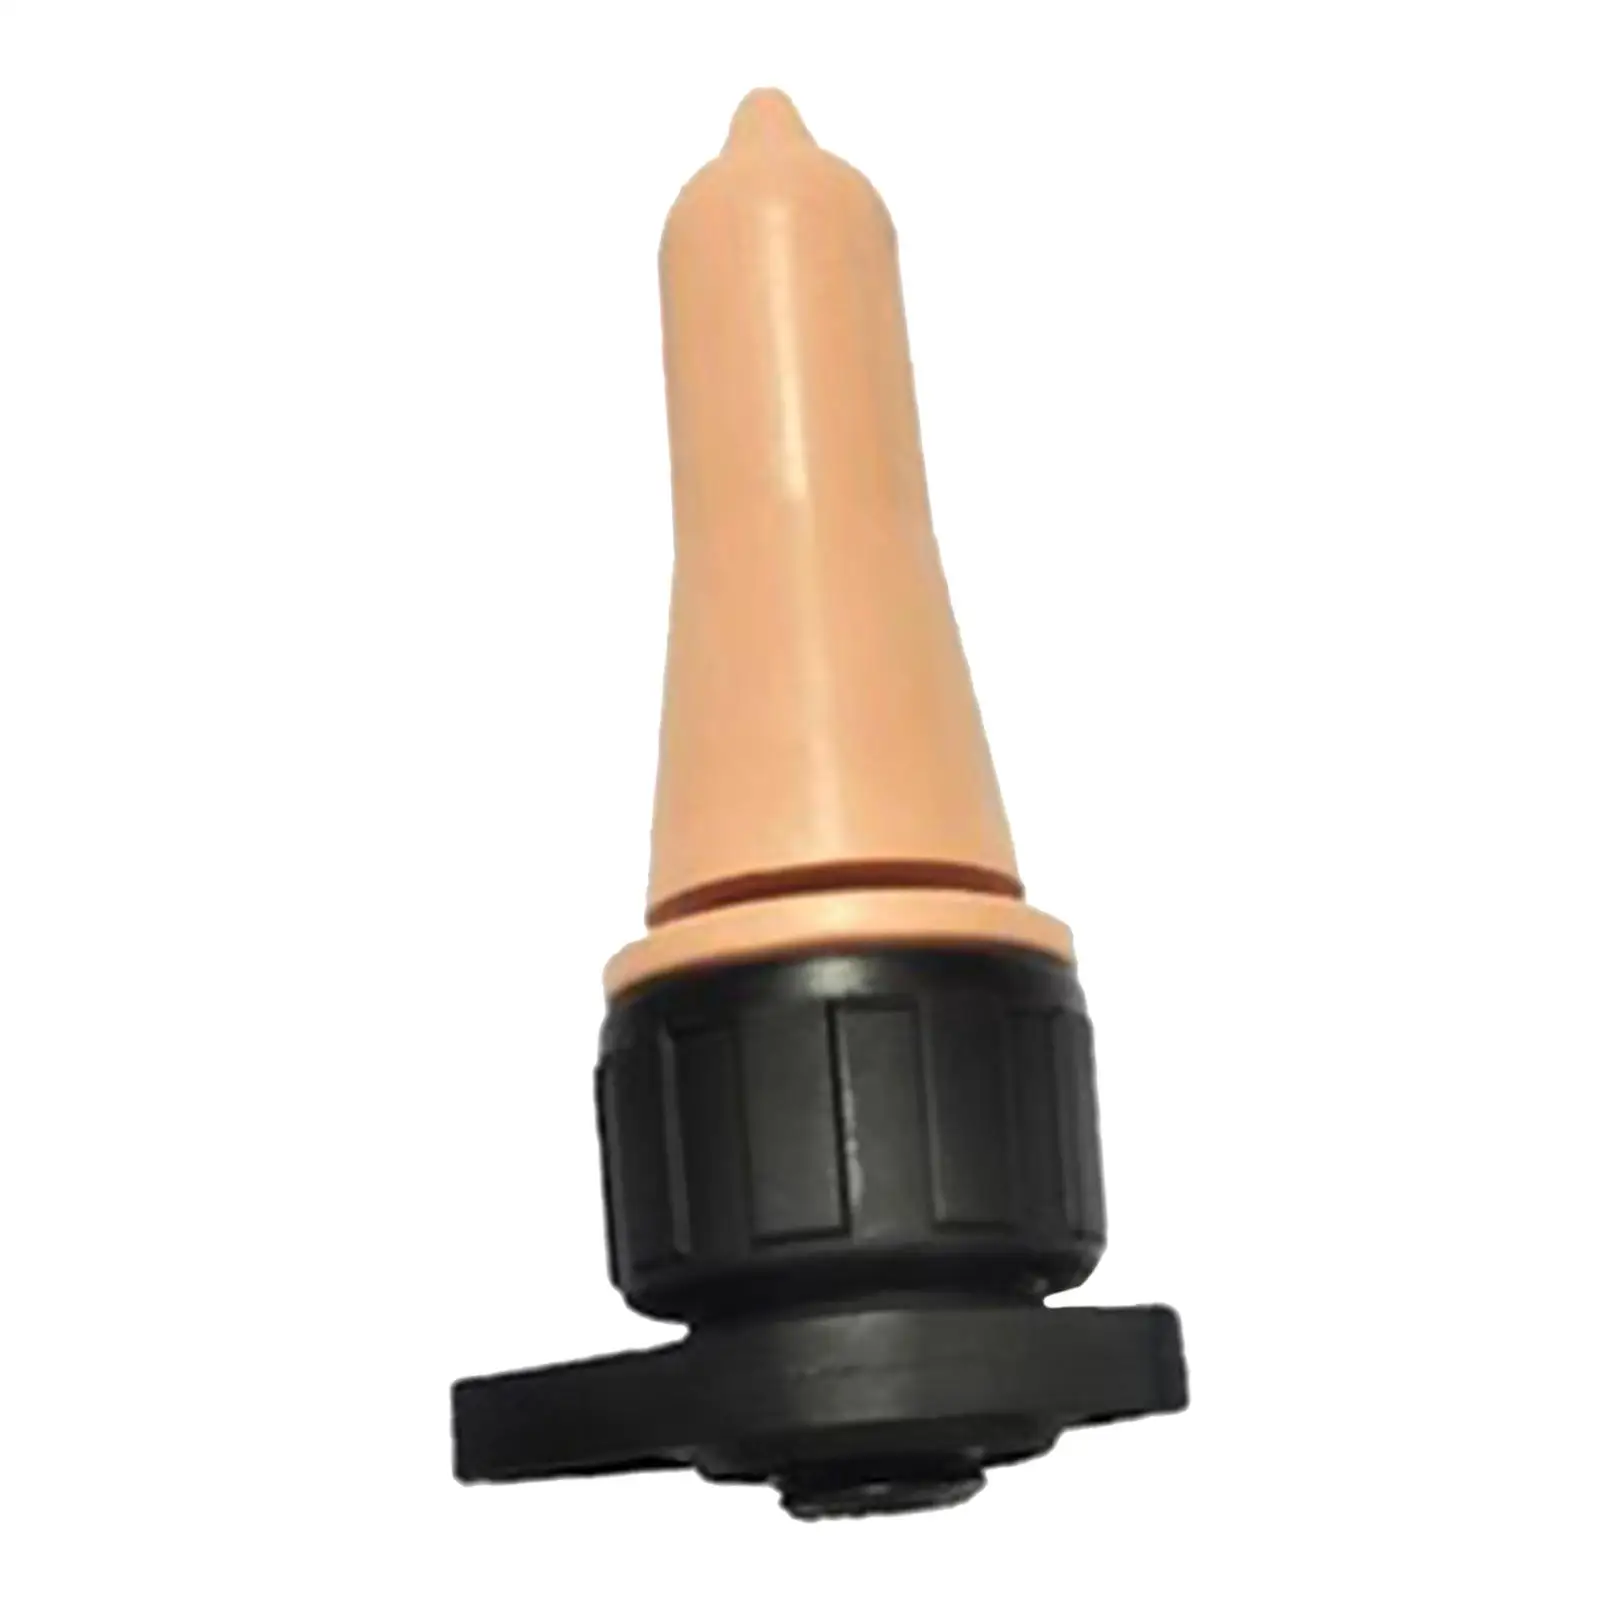 Calf Nipple Peach Teat Soft Rubber Drinking Feeder for Cattle Horse Lamb